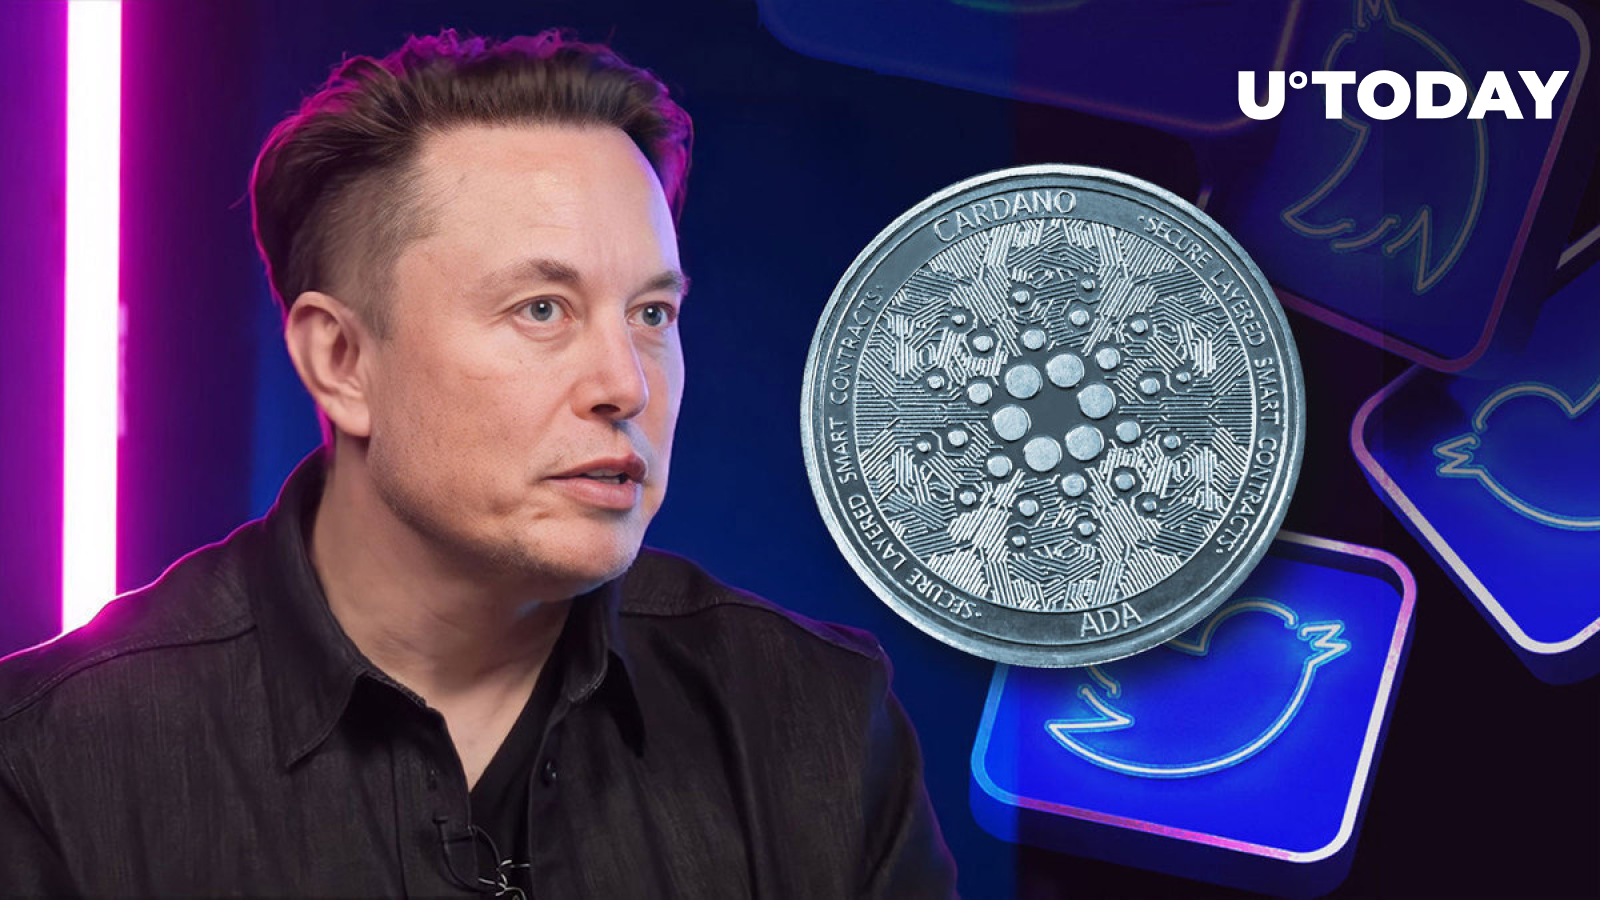 Elon Musk Tweets This, and Cardano’s Most Hyped AI Project Spikes 15%